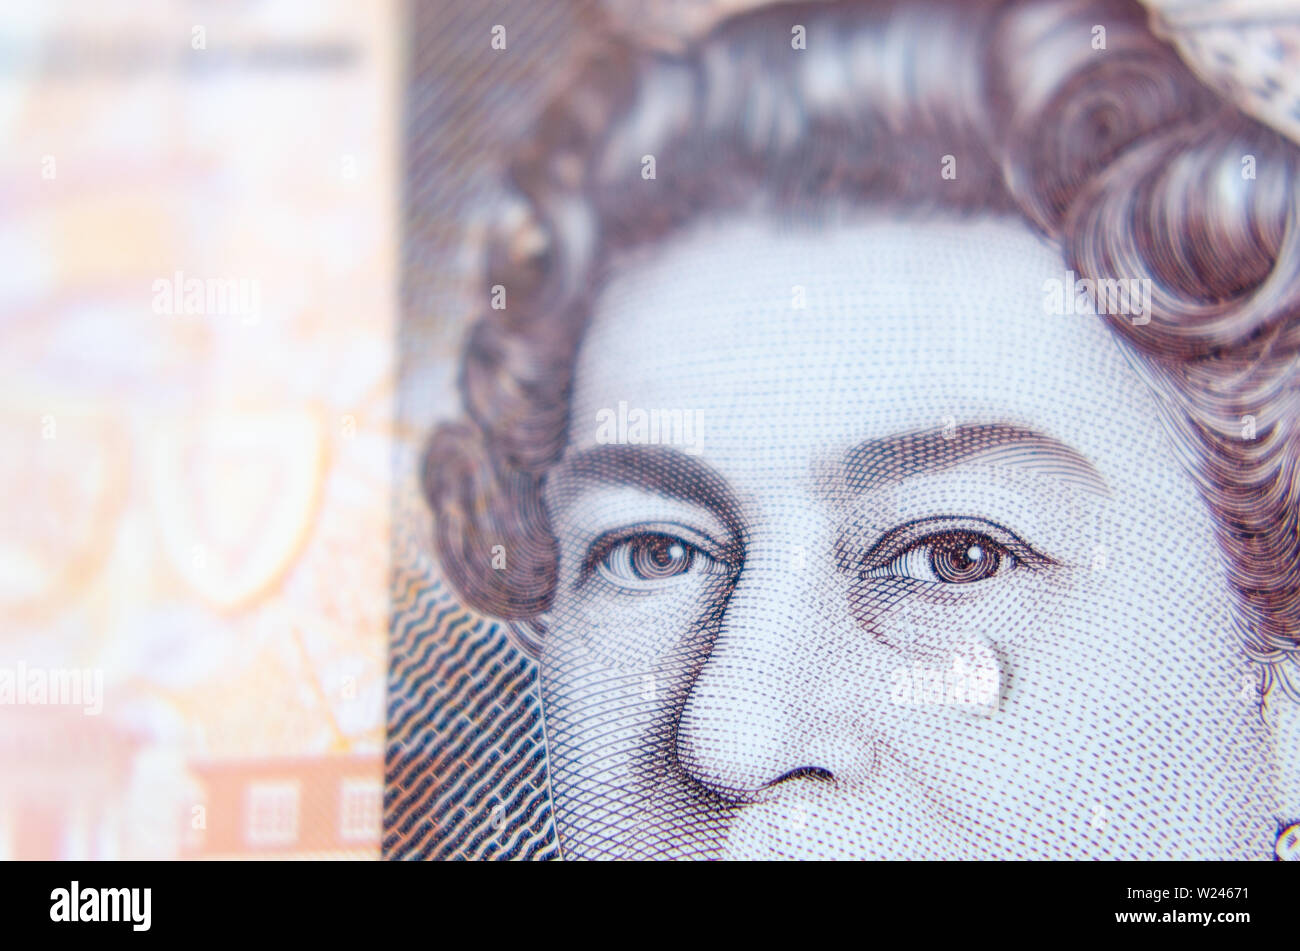 Macro photo of British pound banknote with a water tear drop as a tear on the Queen's face. Conceptual photo. Stock Photo